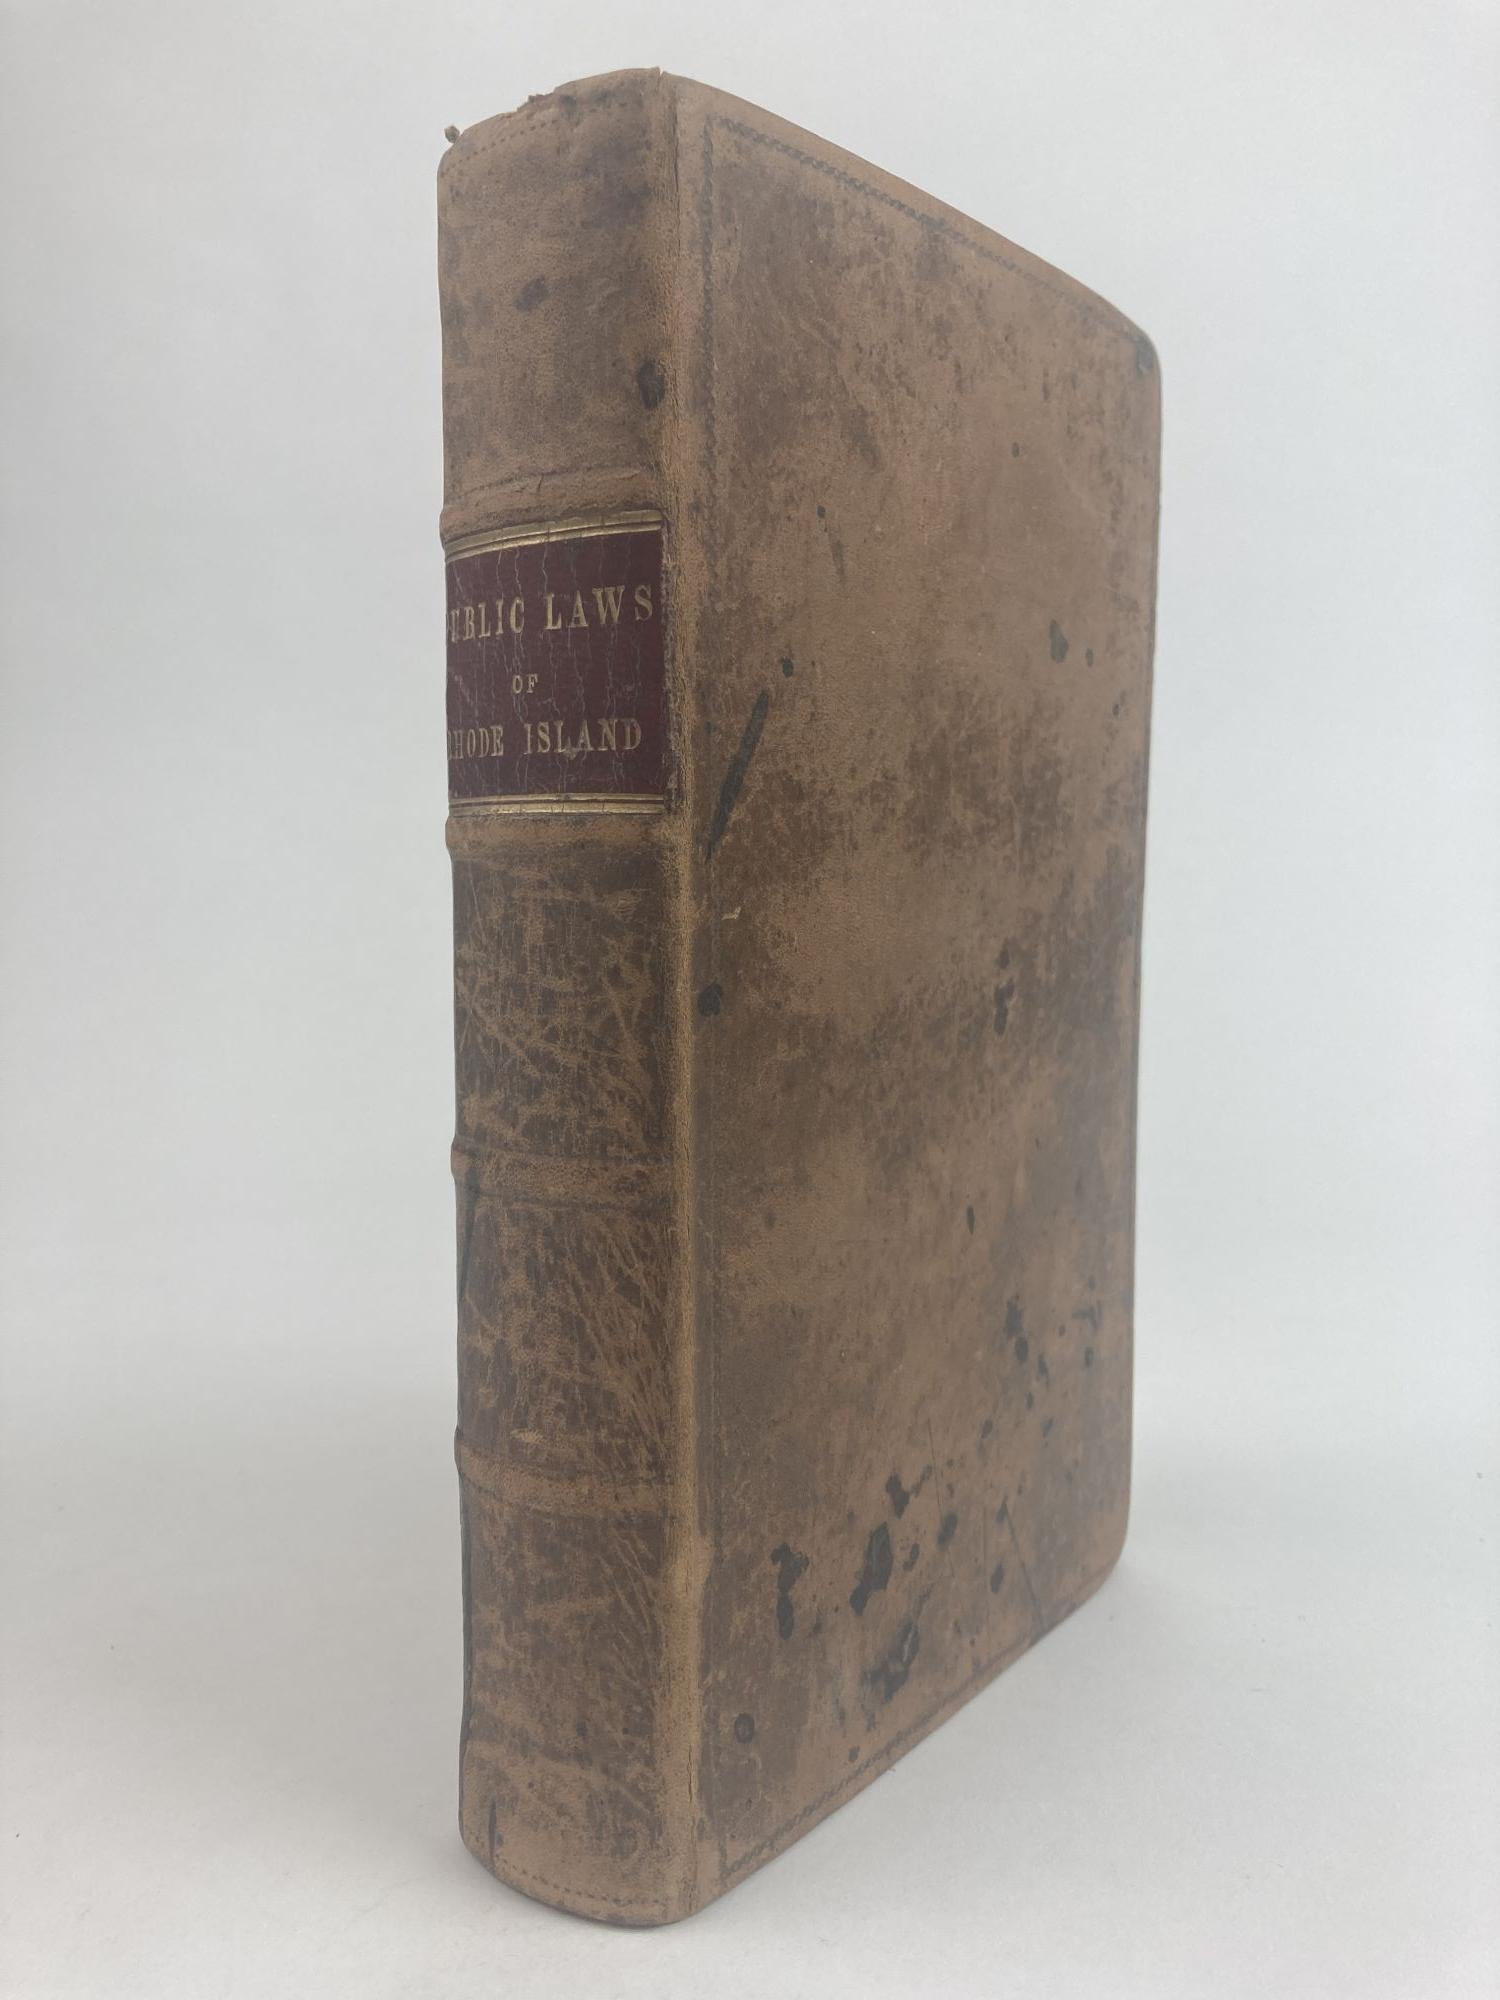 Public Laws of the State of Rhode-Island and Providence Plantations, As ...